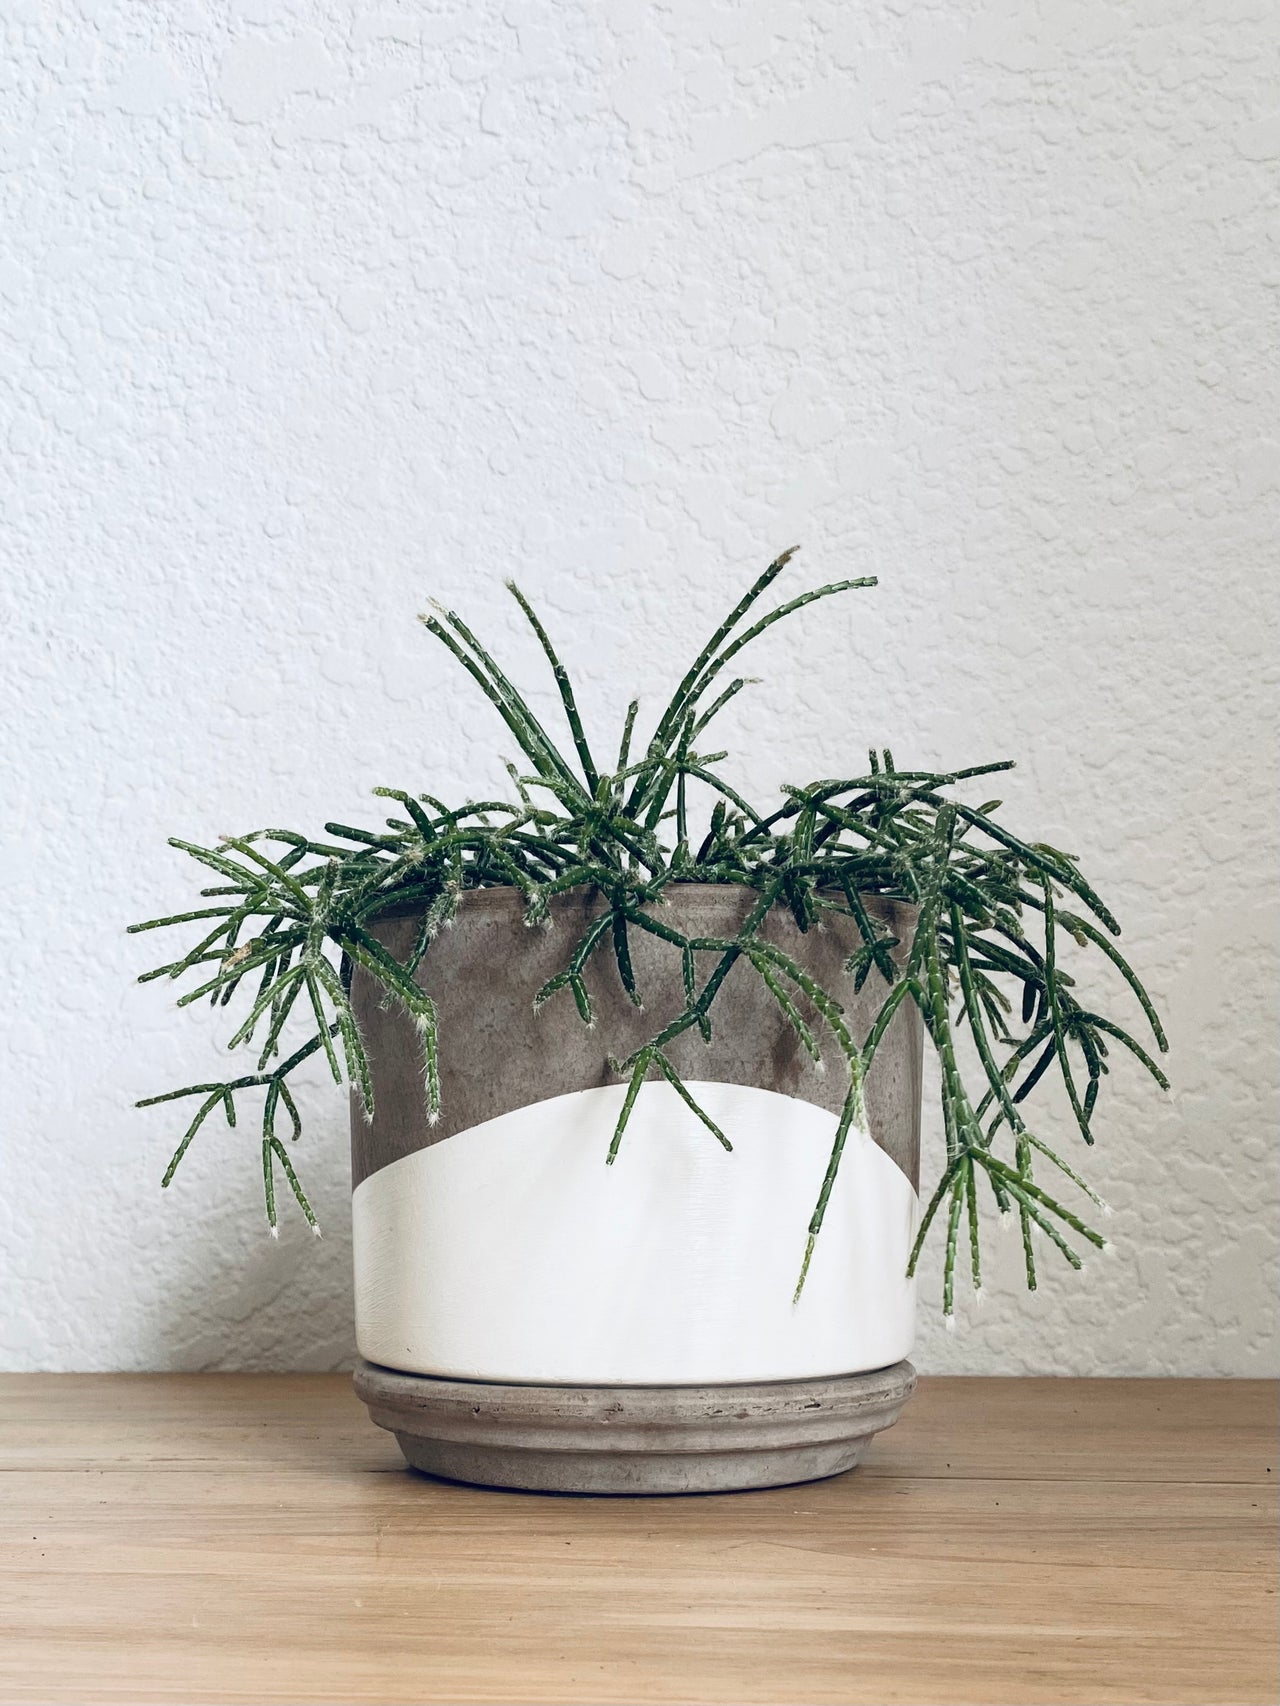 Rhipsalis Plant With Hand-Painted Pot